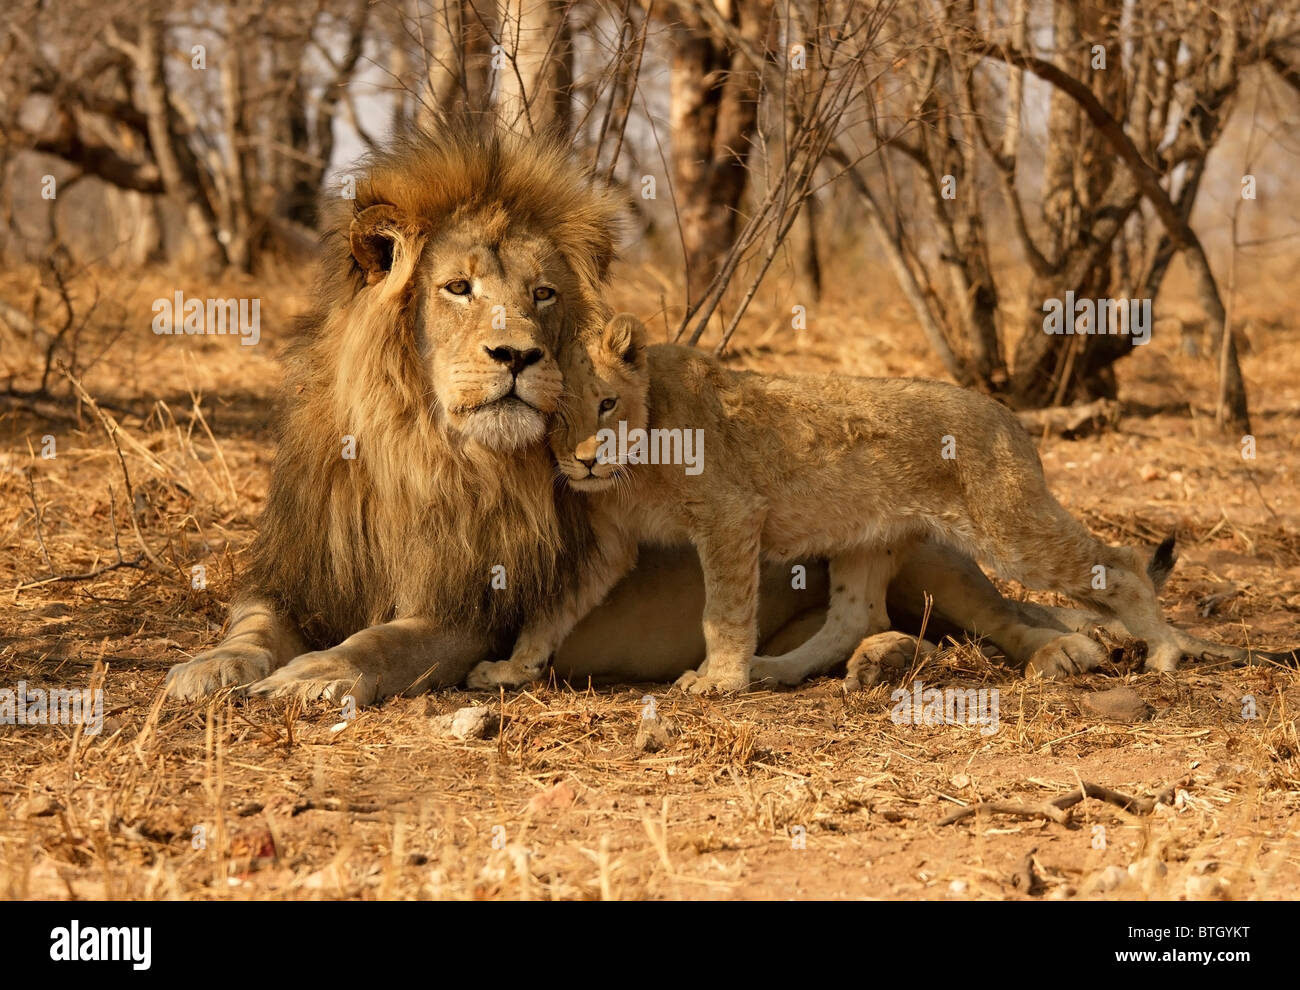 Male Lion with cub, Kruger National Park, South Africa. Stock Photo